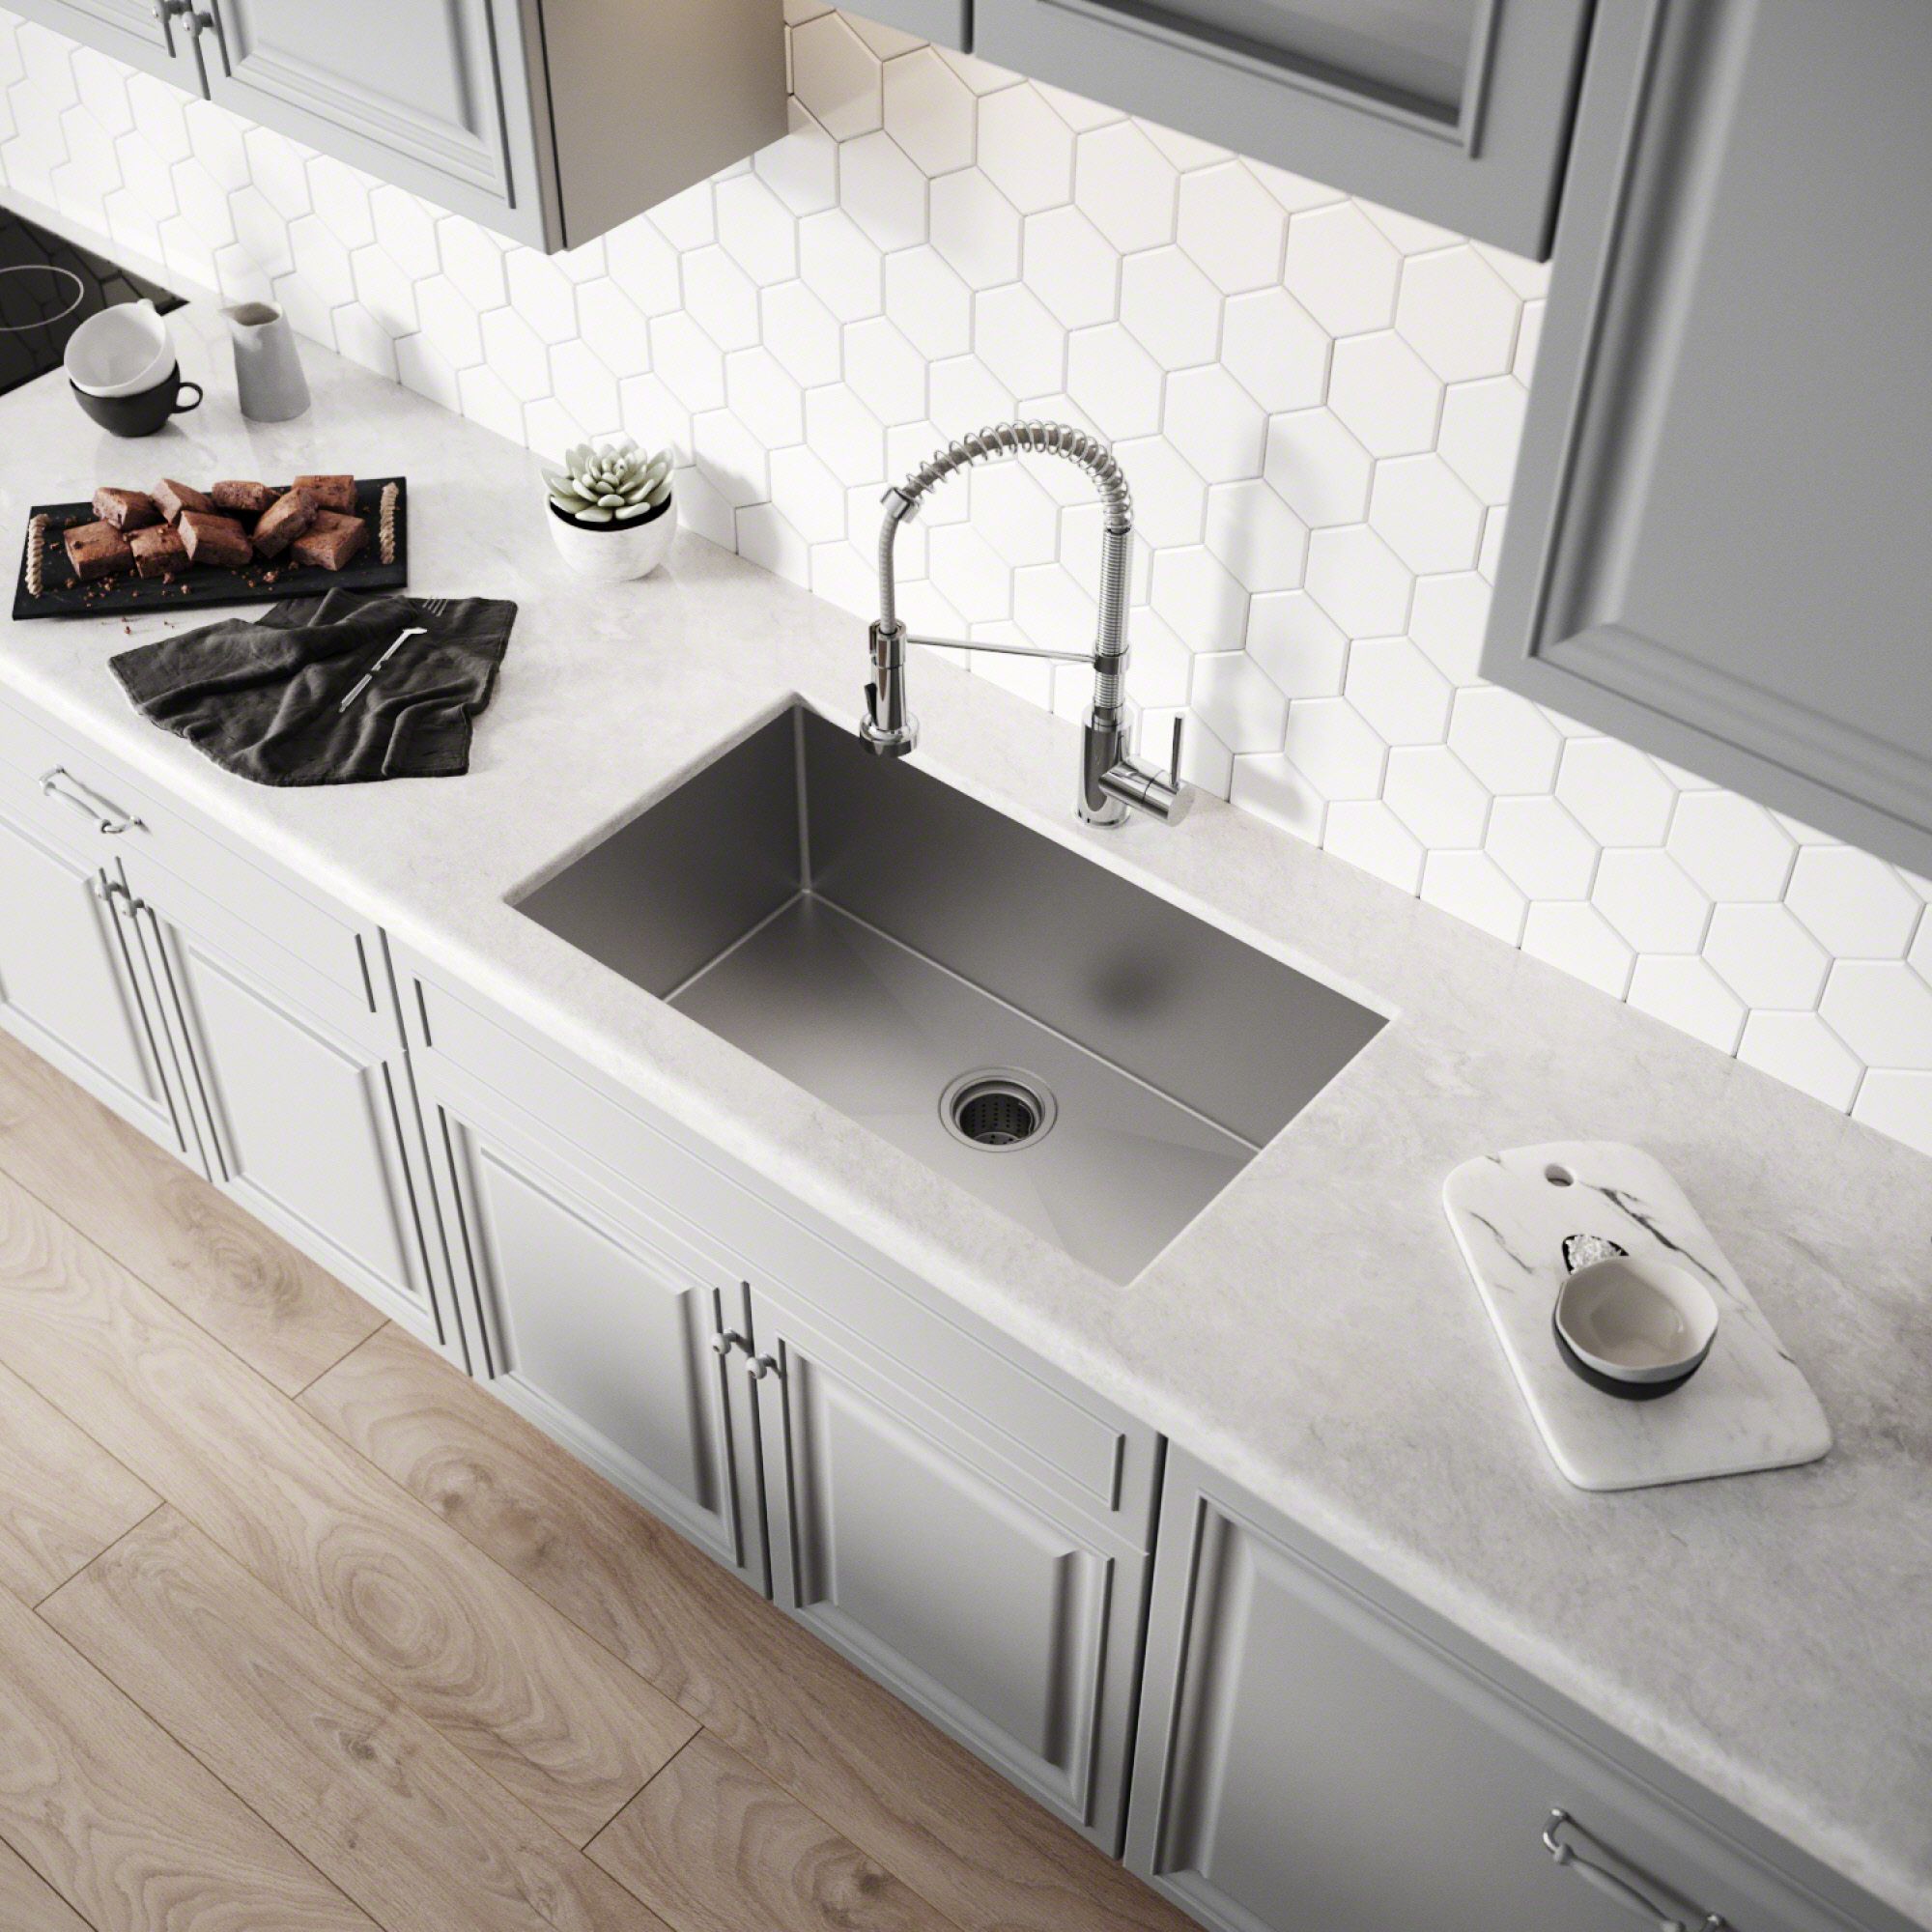 undermount kitchen sink - Use the trending colors in your home the right way